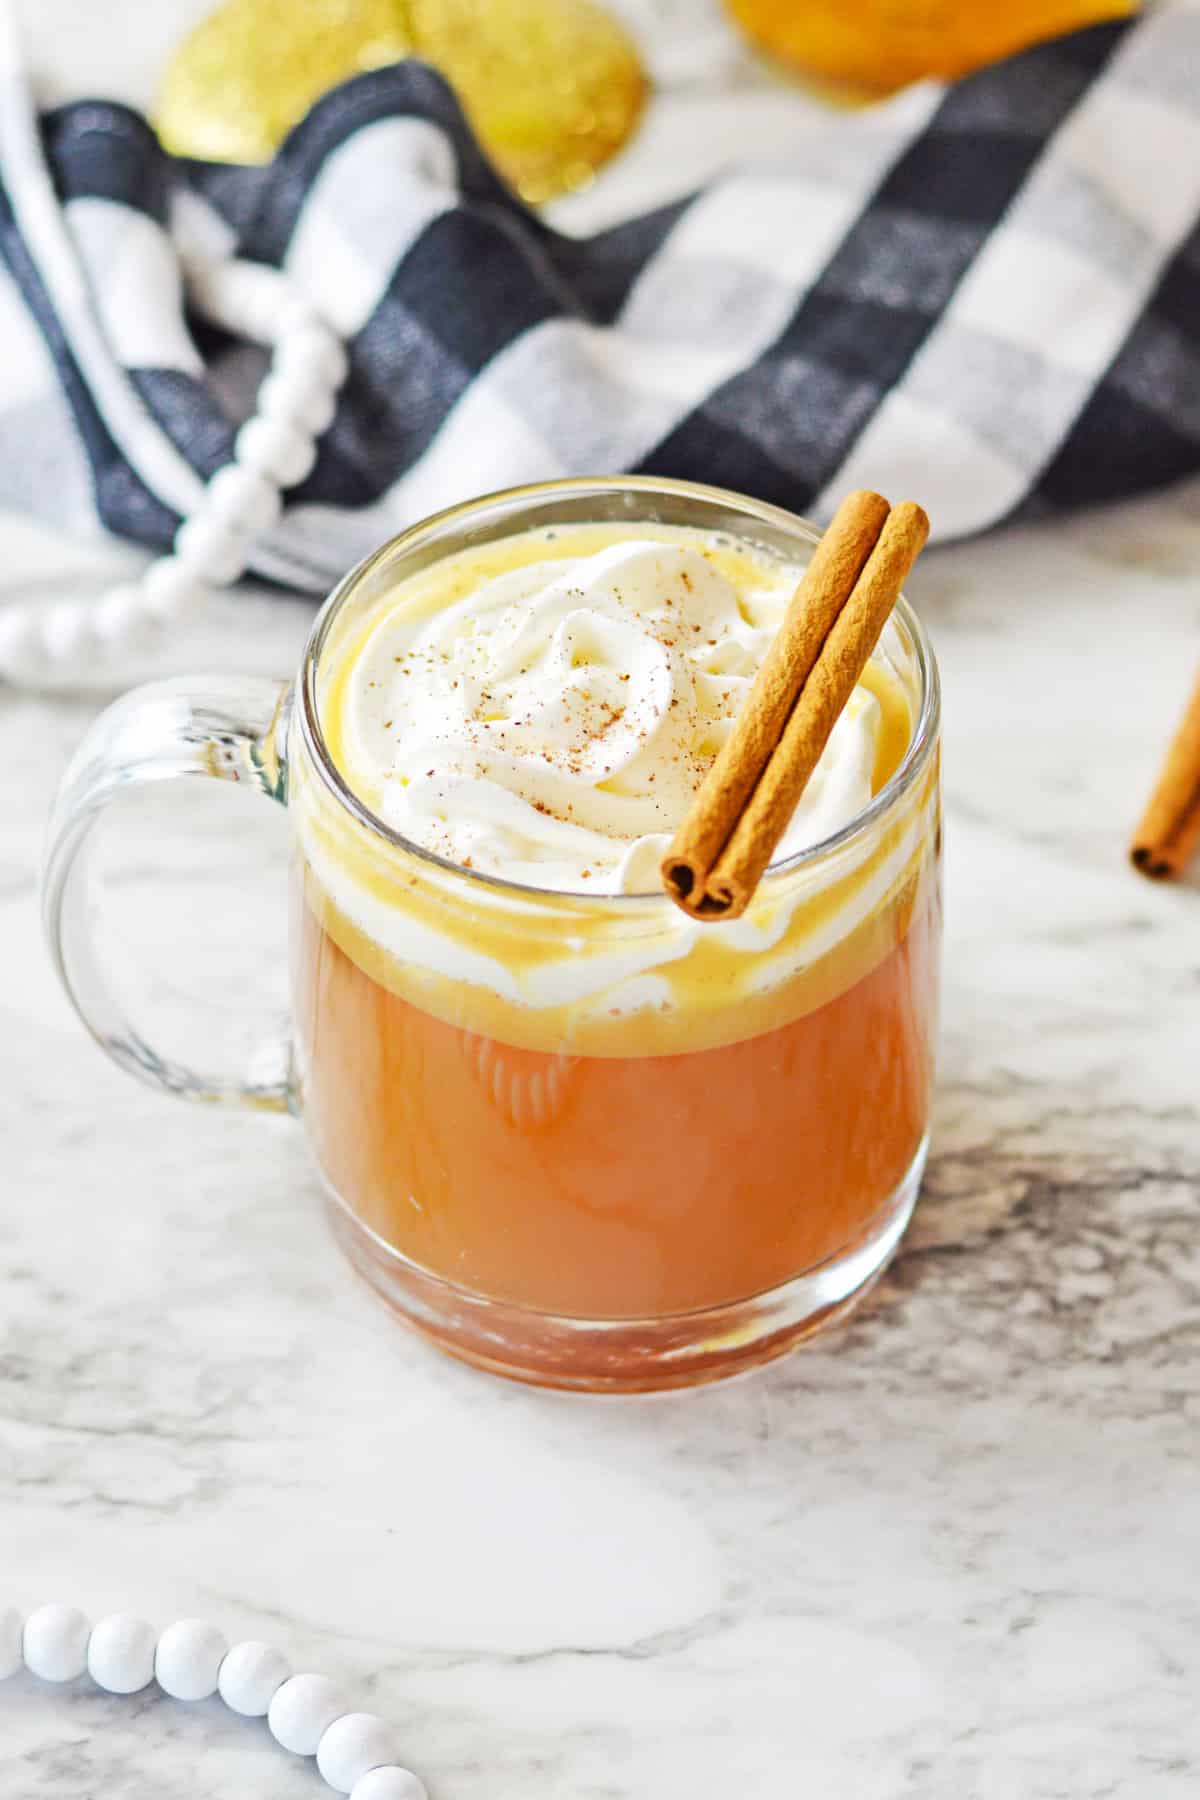 Hot buttered rum cocktail topped with whipped cream and cinnamon stick in a clear glass mug.